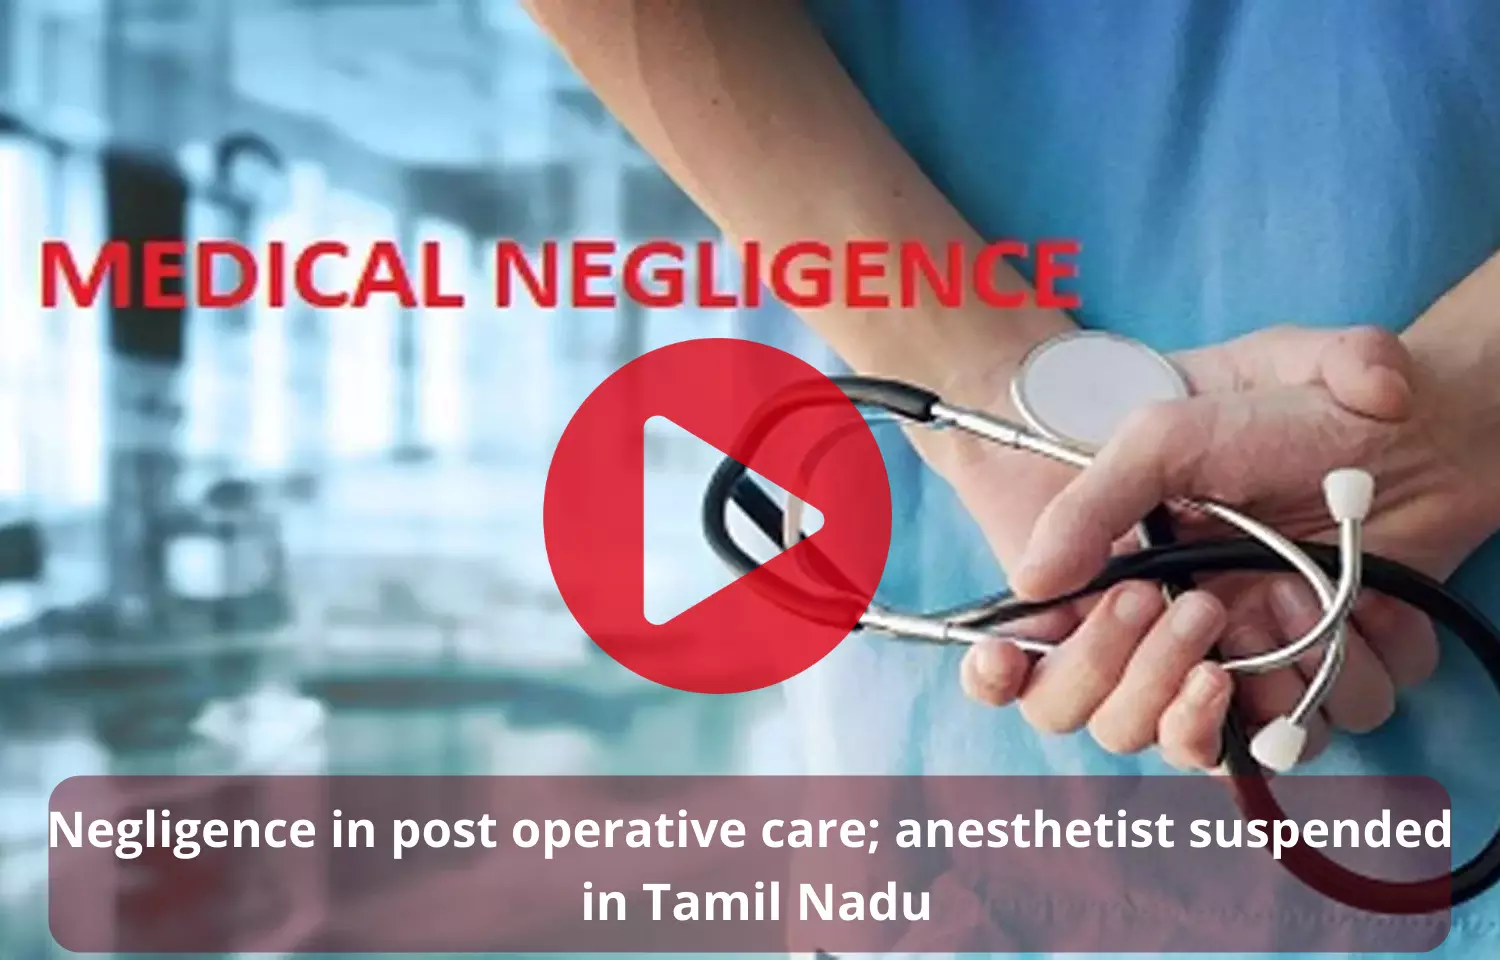 Tamil Nadu: Kumarasamy Hospital anesthesiologist suspended over negligence in post operative care